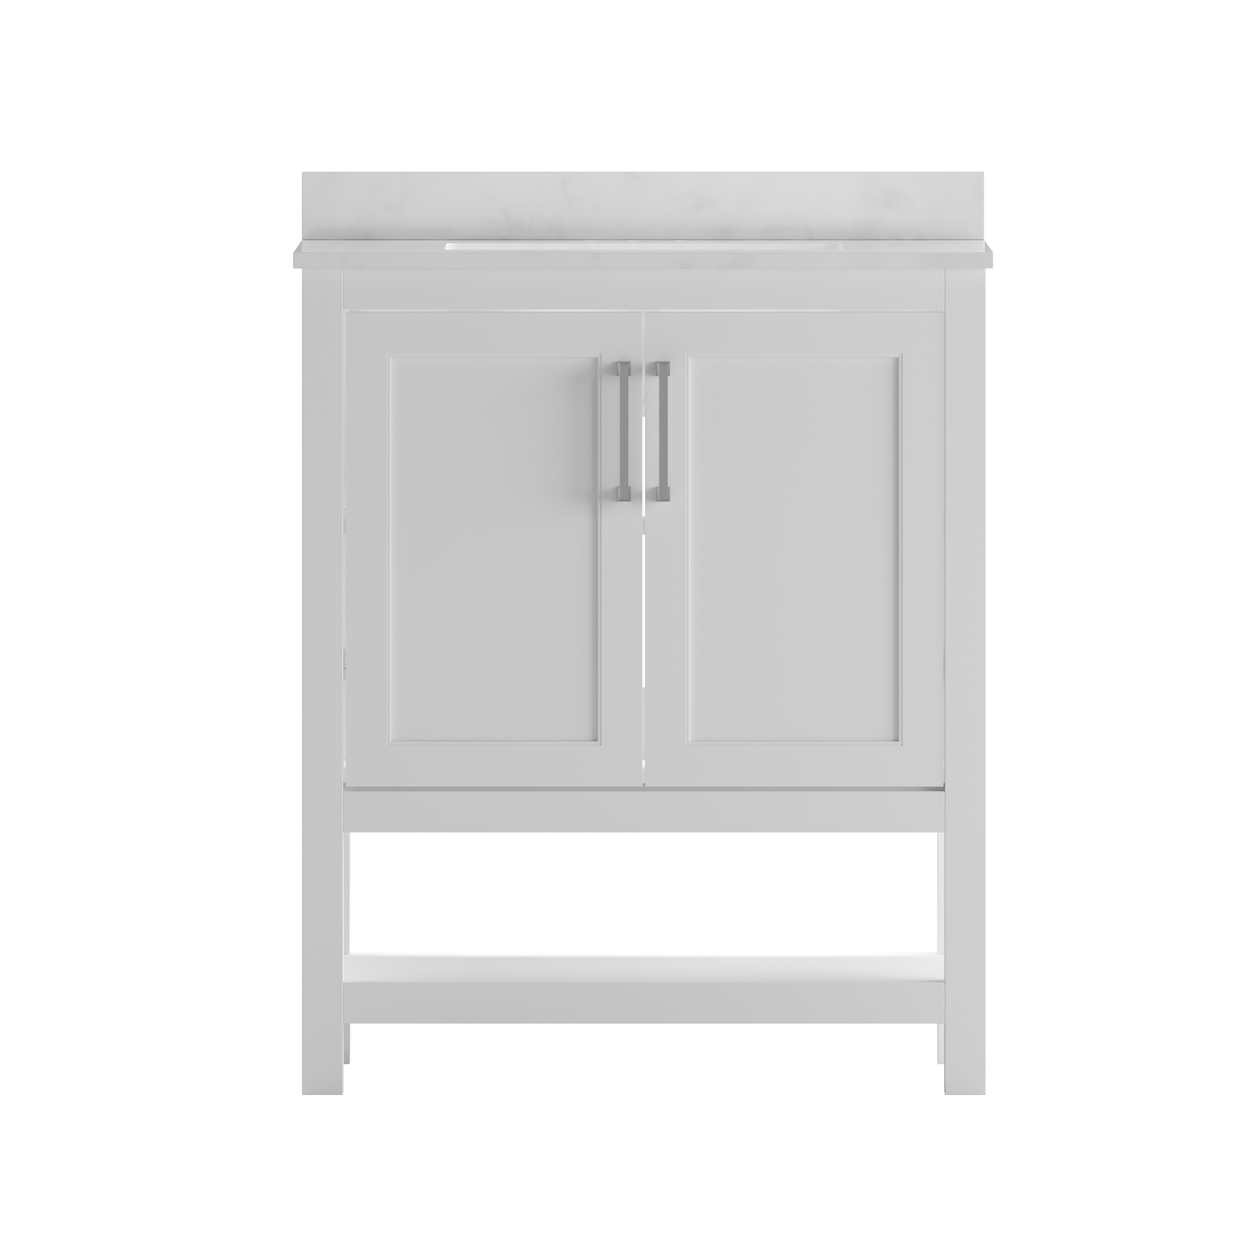 Vega 30 Inch Bathroom Vanity With Sink Combo, Cabinet With Soft Close Doors And Open Shelf, Carrara Marble Finish Countertop, White